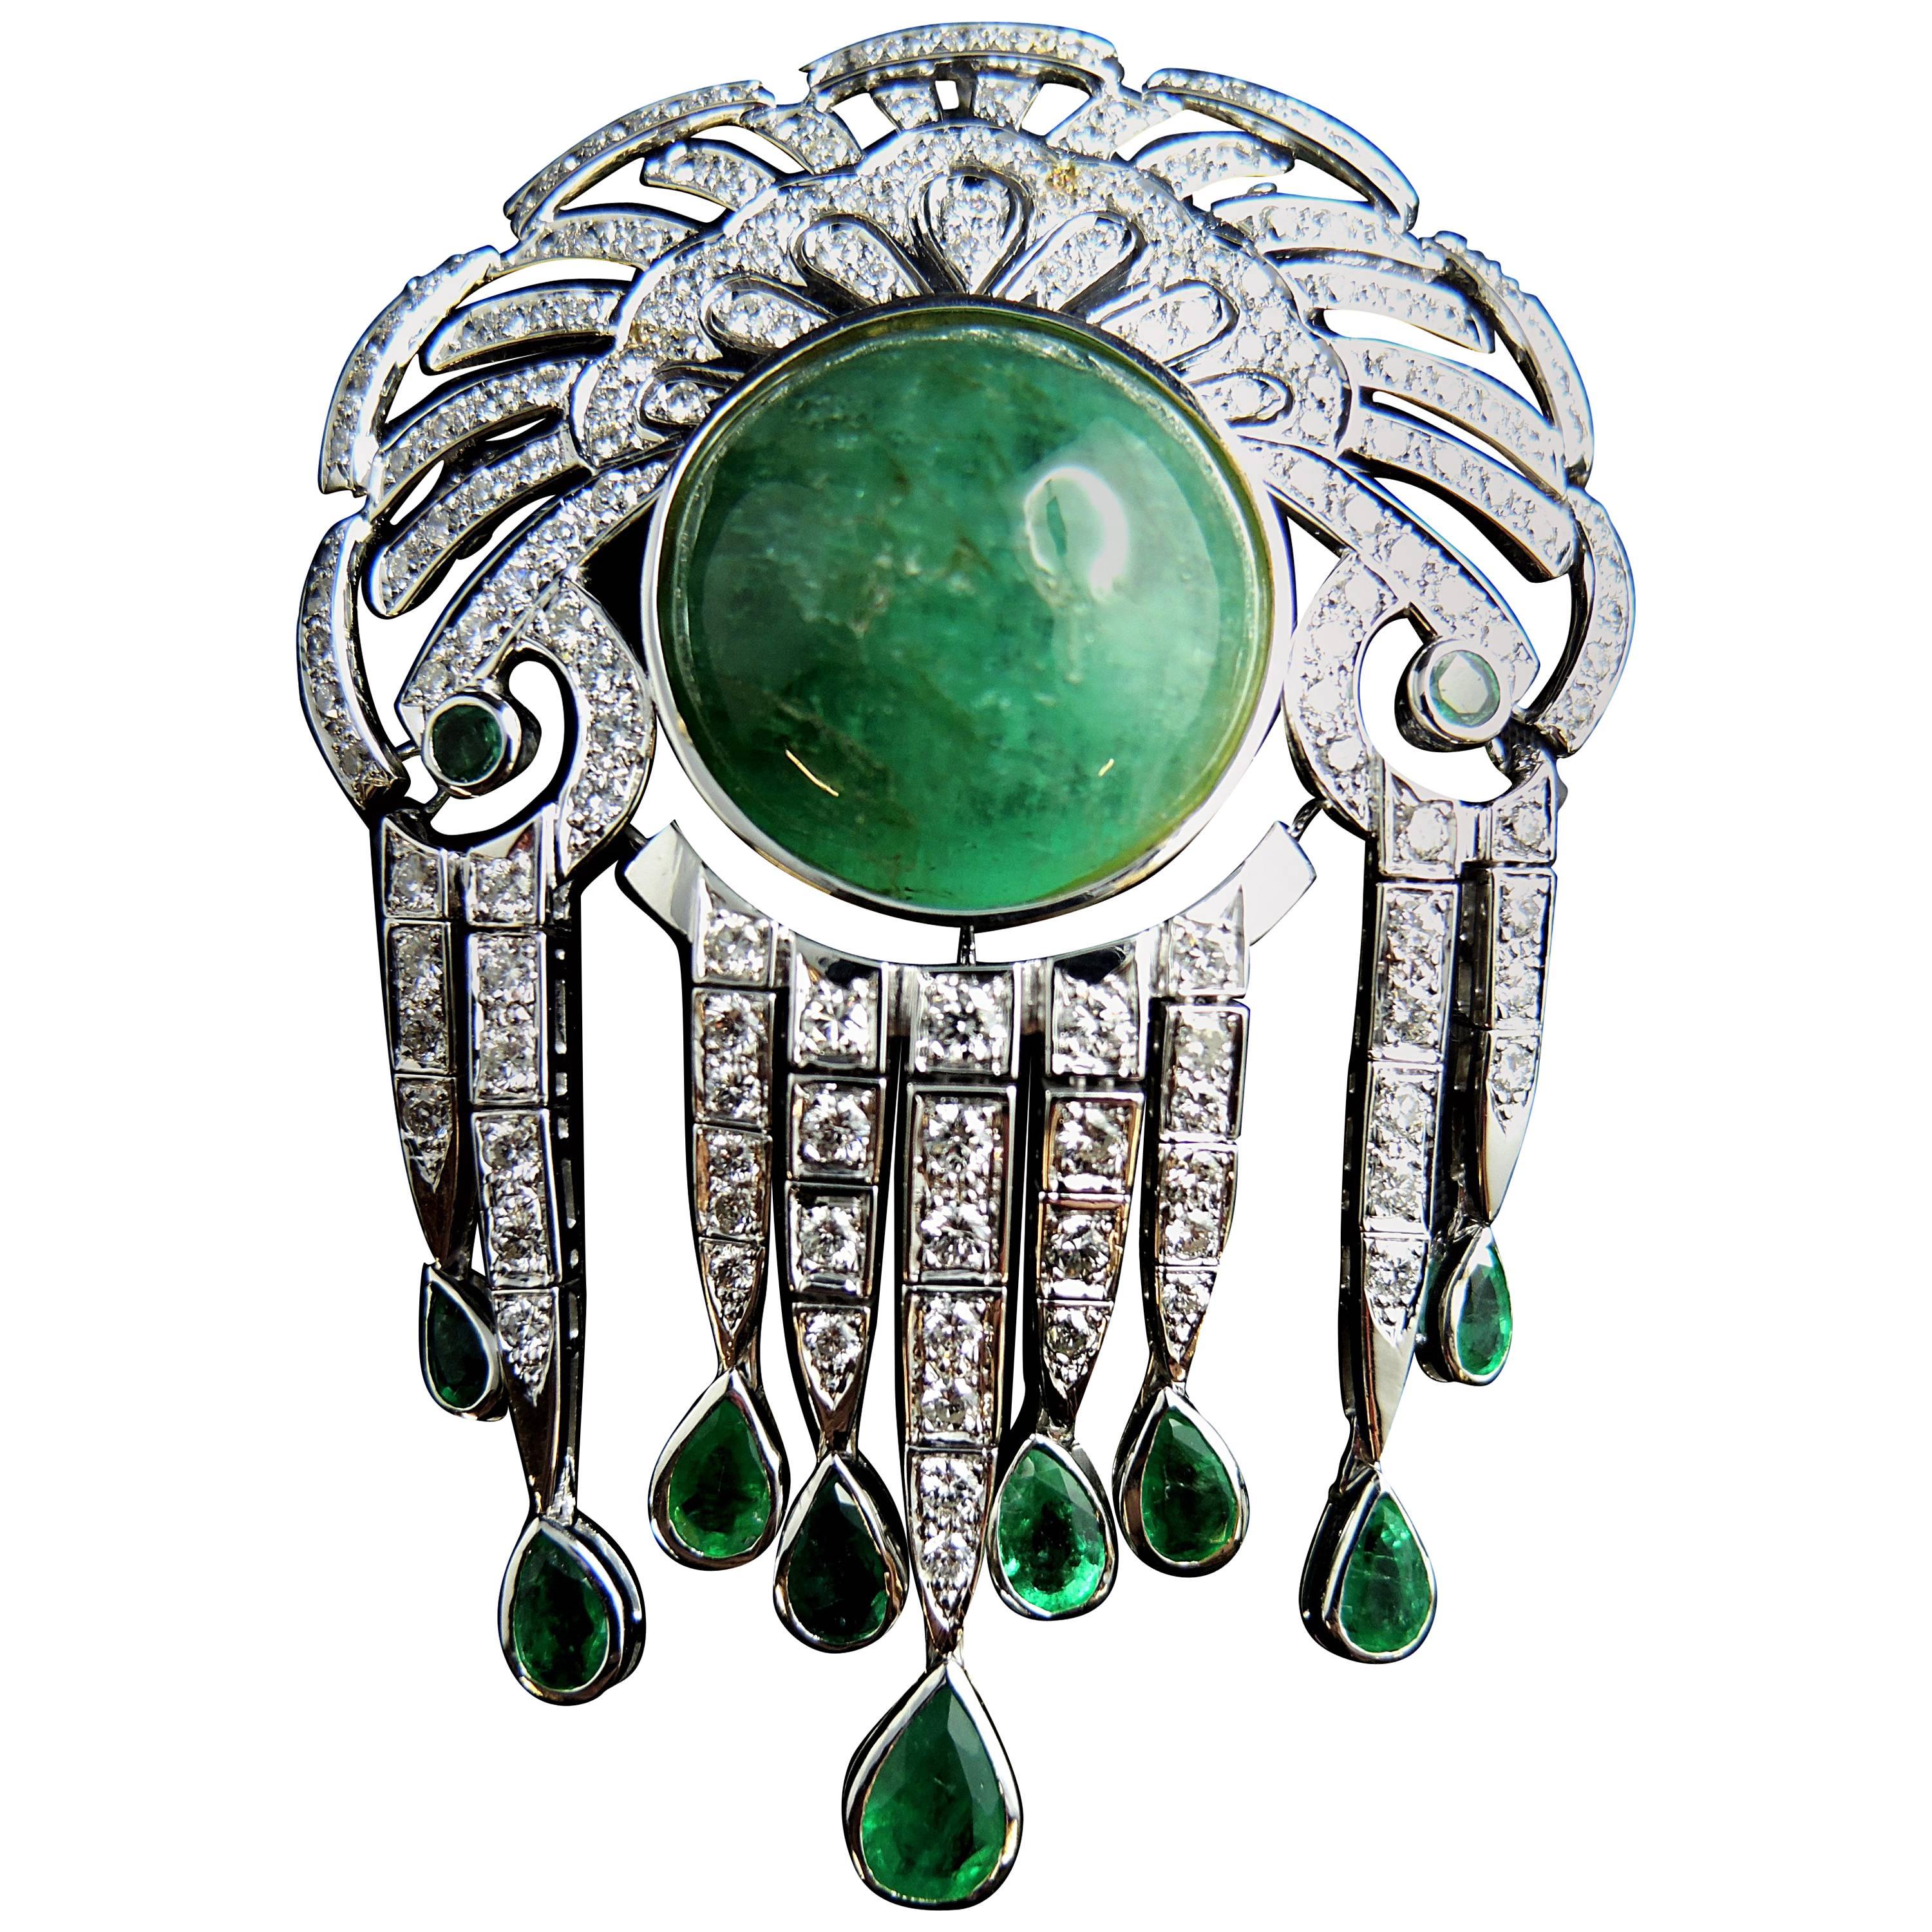 French Emerald Diamond Brooch and Pendant